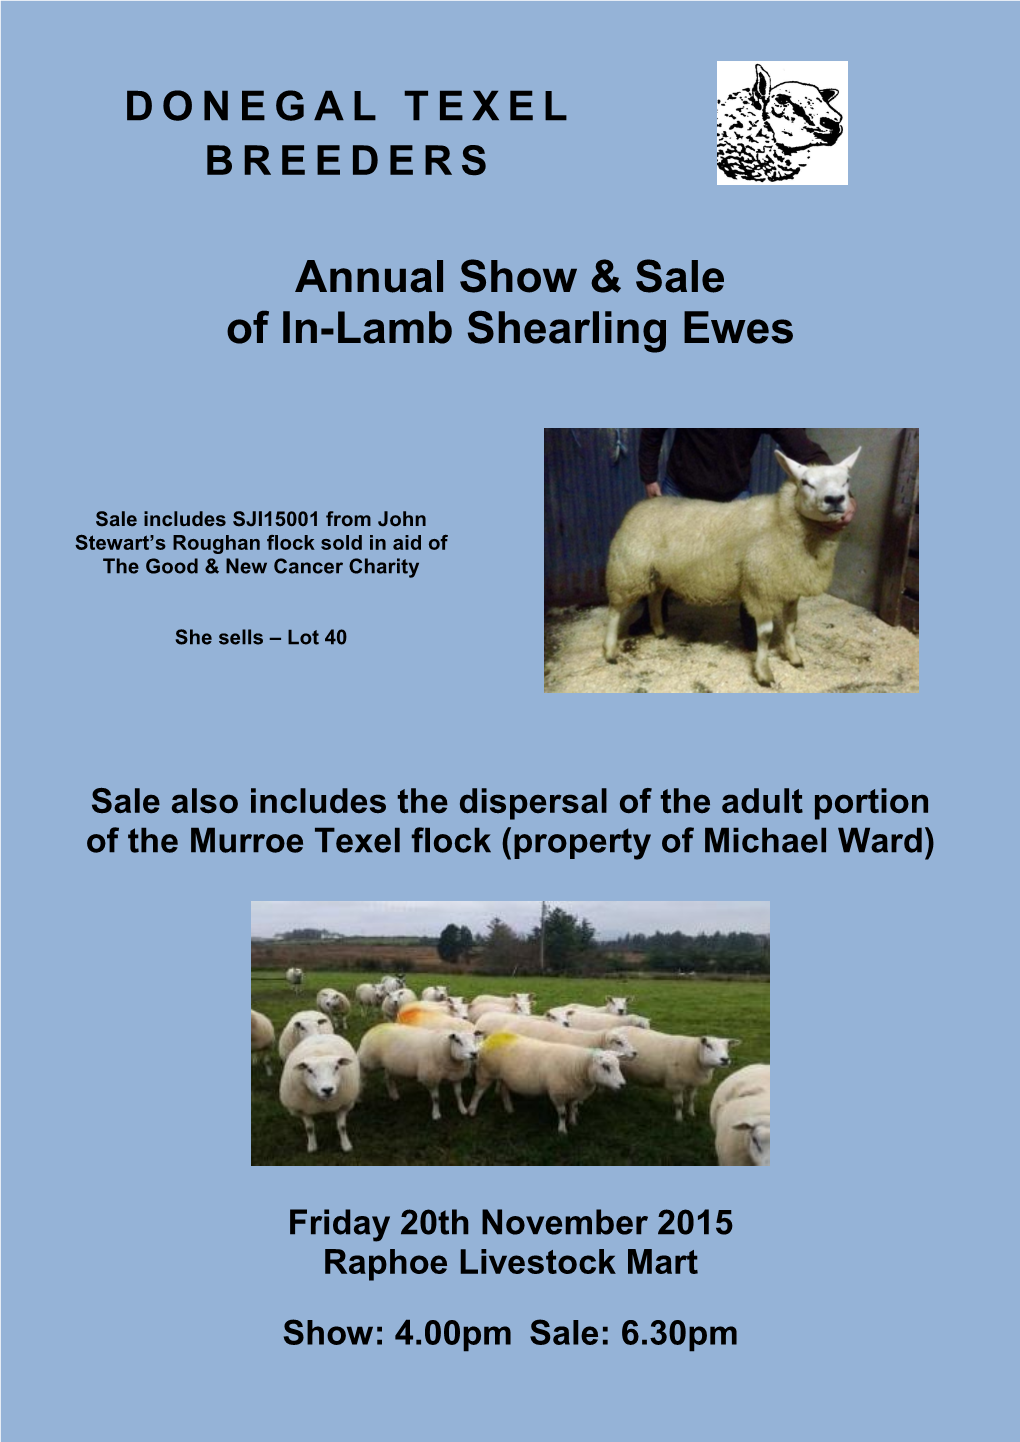 Annual Show & Sale of In-Lamb Shearling Ewes